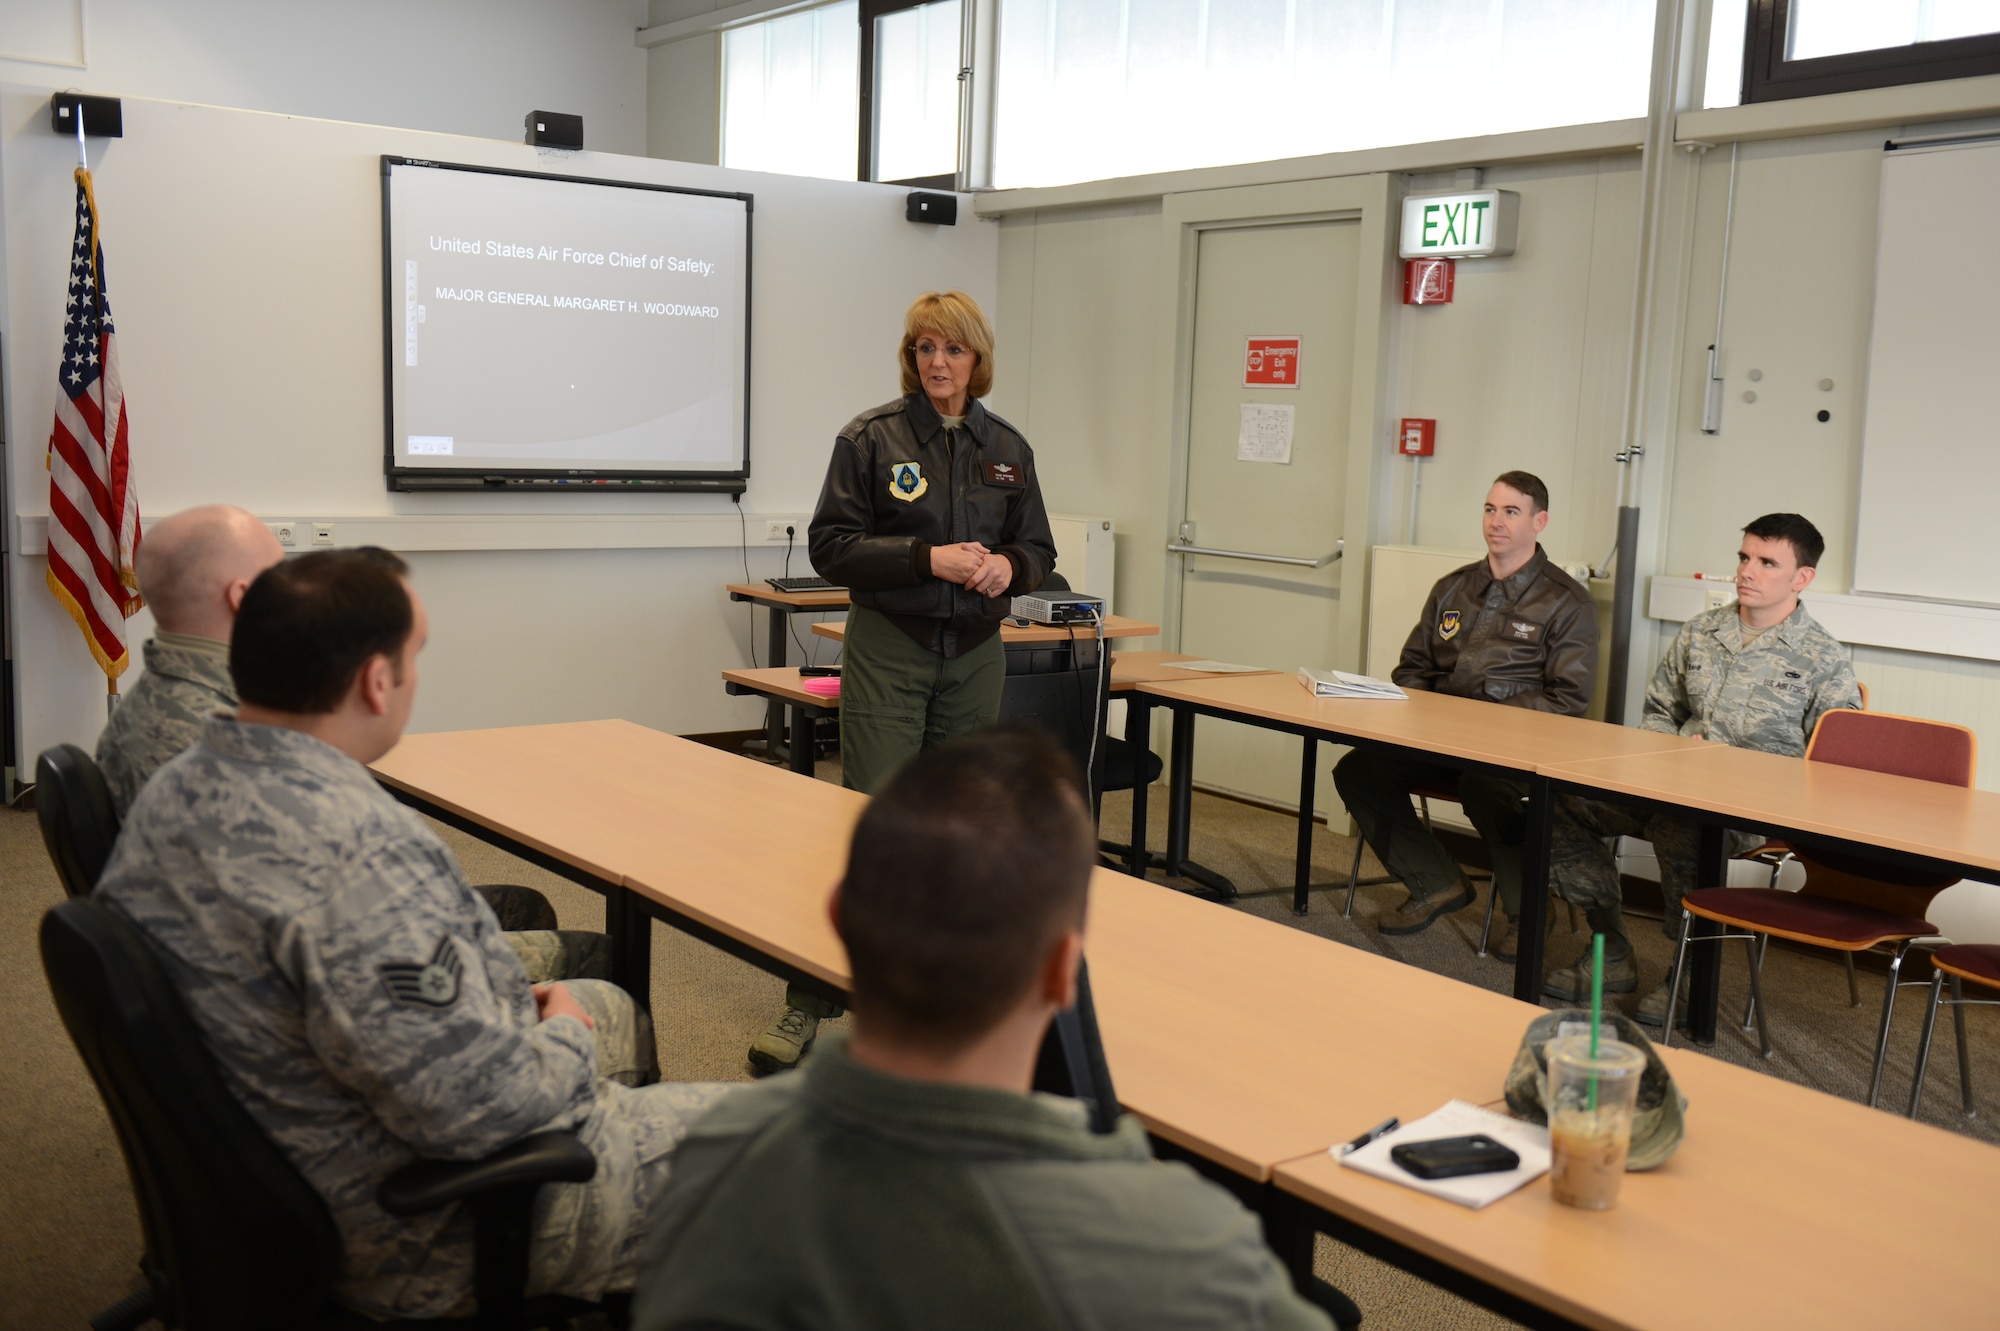 SPANGDAHLEM AIR BASE, Germany – U.S. Air Force Maj. Gen. Margaret Woodward, Air Force Chief of Safety, speaks at a weapons safety representative meeting inside the 52nd Fighter Wing Safety office Dec. 12, 2012. During her familiarization tour, Woodward met and spoke with Airmen from safety’s three functional areas: weapons, ground and flight safety. The representatives briefed the general on the wide gambit of Spangdahlem’s safety operations. (U.S. Air Force photo by Airman 1st Class Gustavo Castillo/Released)